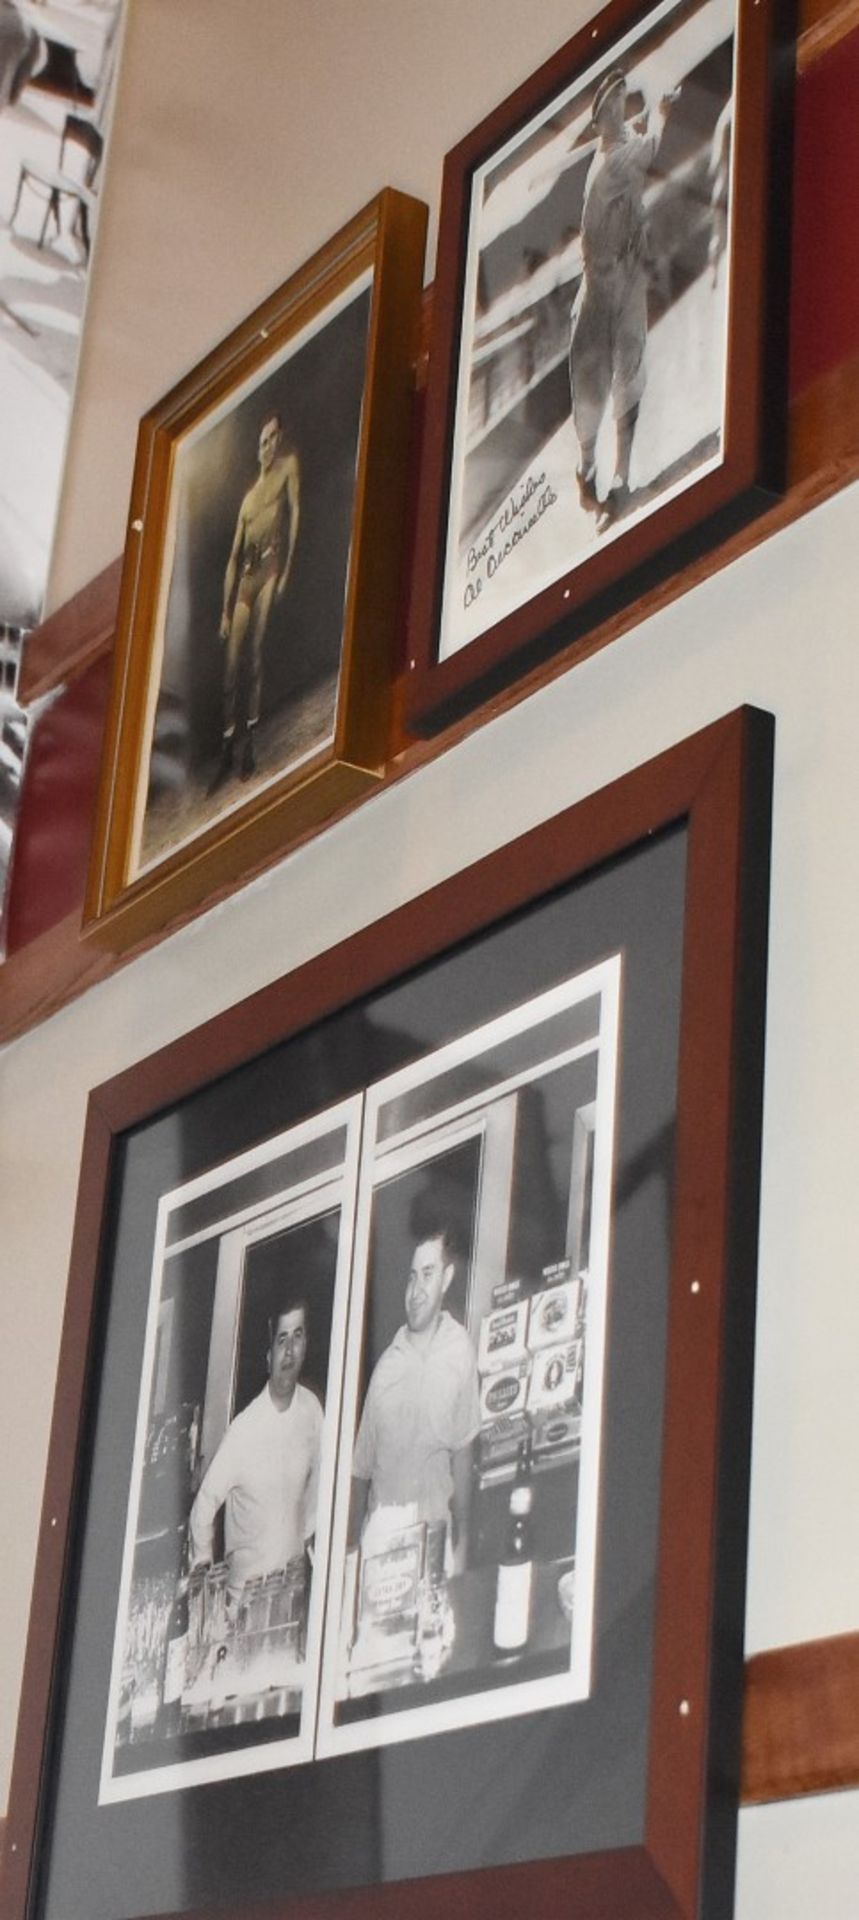 Approx 160 x Assorted Framed Pictures Featuring Nostalgic Images From an Italian-American Restaurant - Image 22 of 31